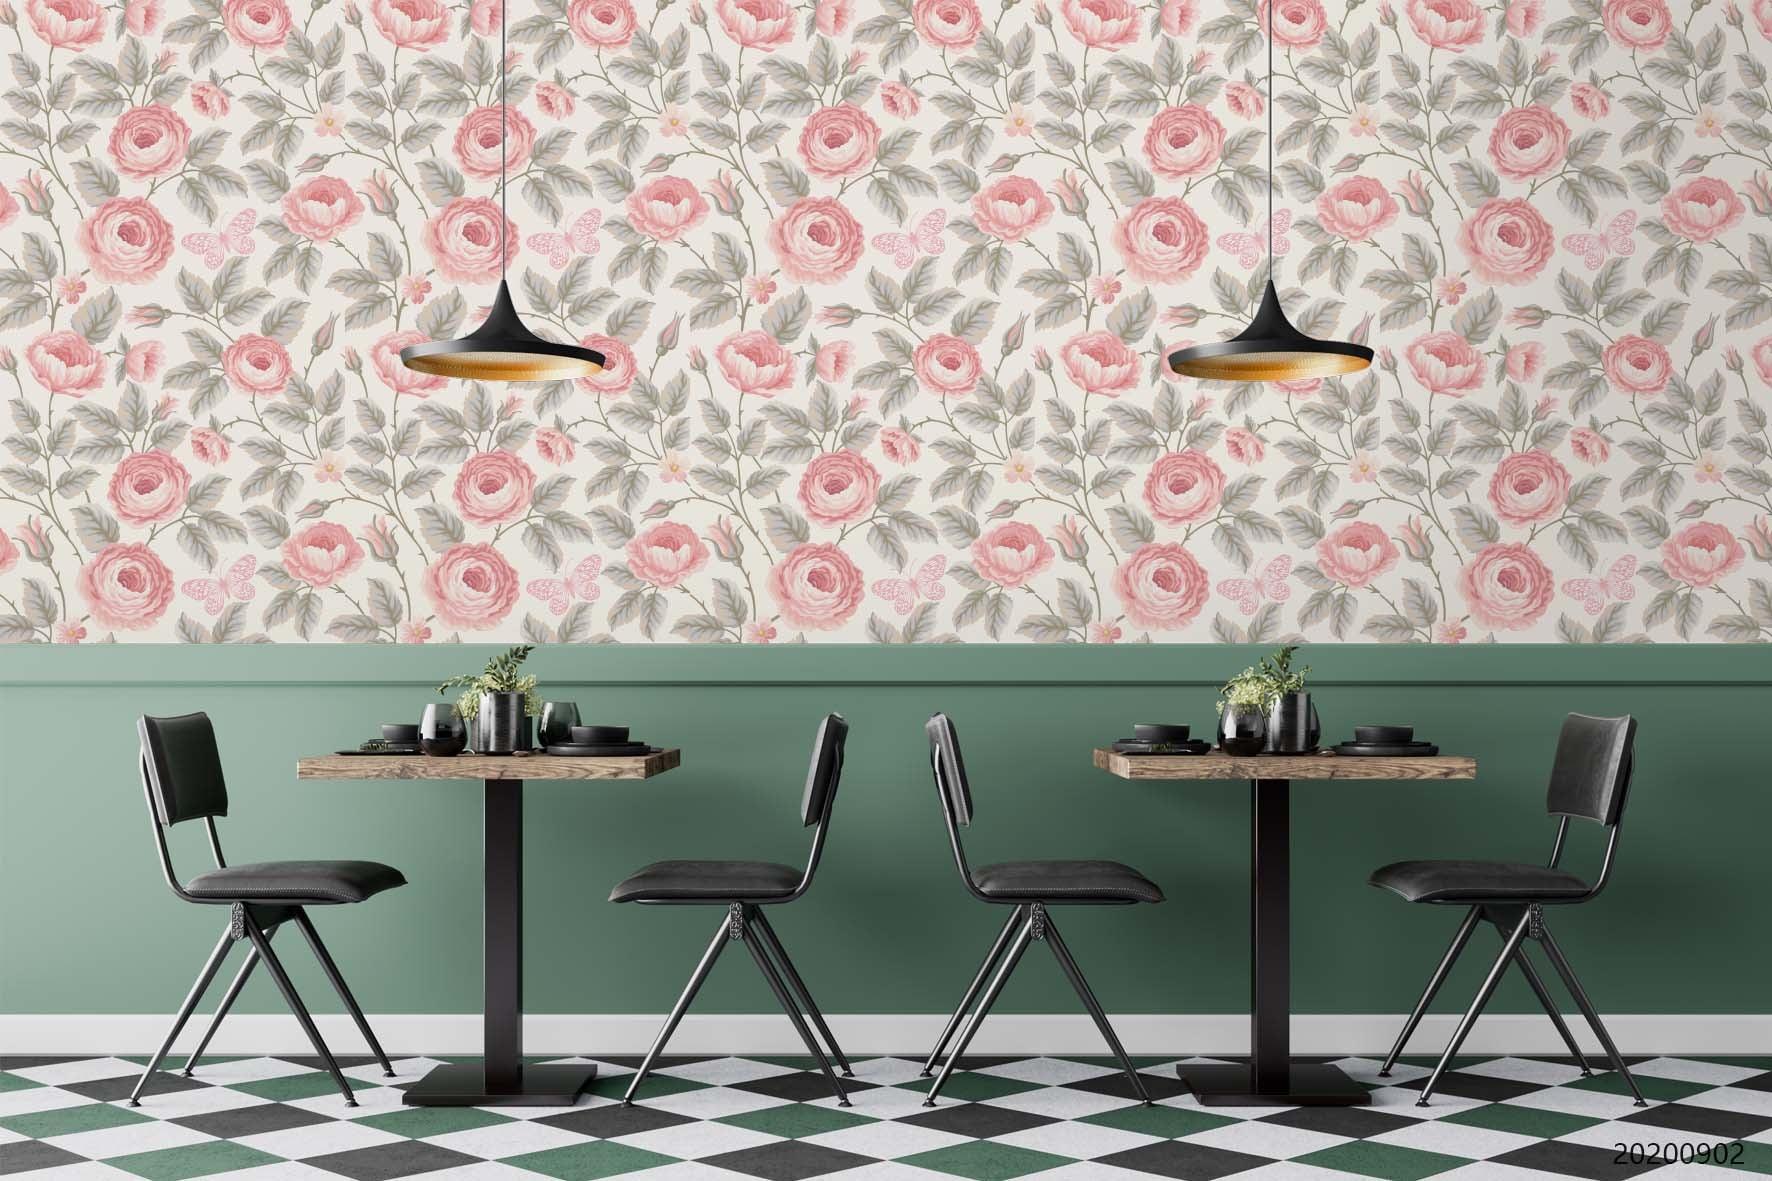 3D Hand Sketching Pink Floral Leaves Wall Mural Wallpaper LXL 1237- Jess Art Decoration